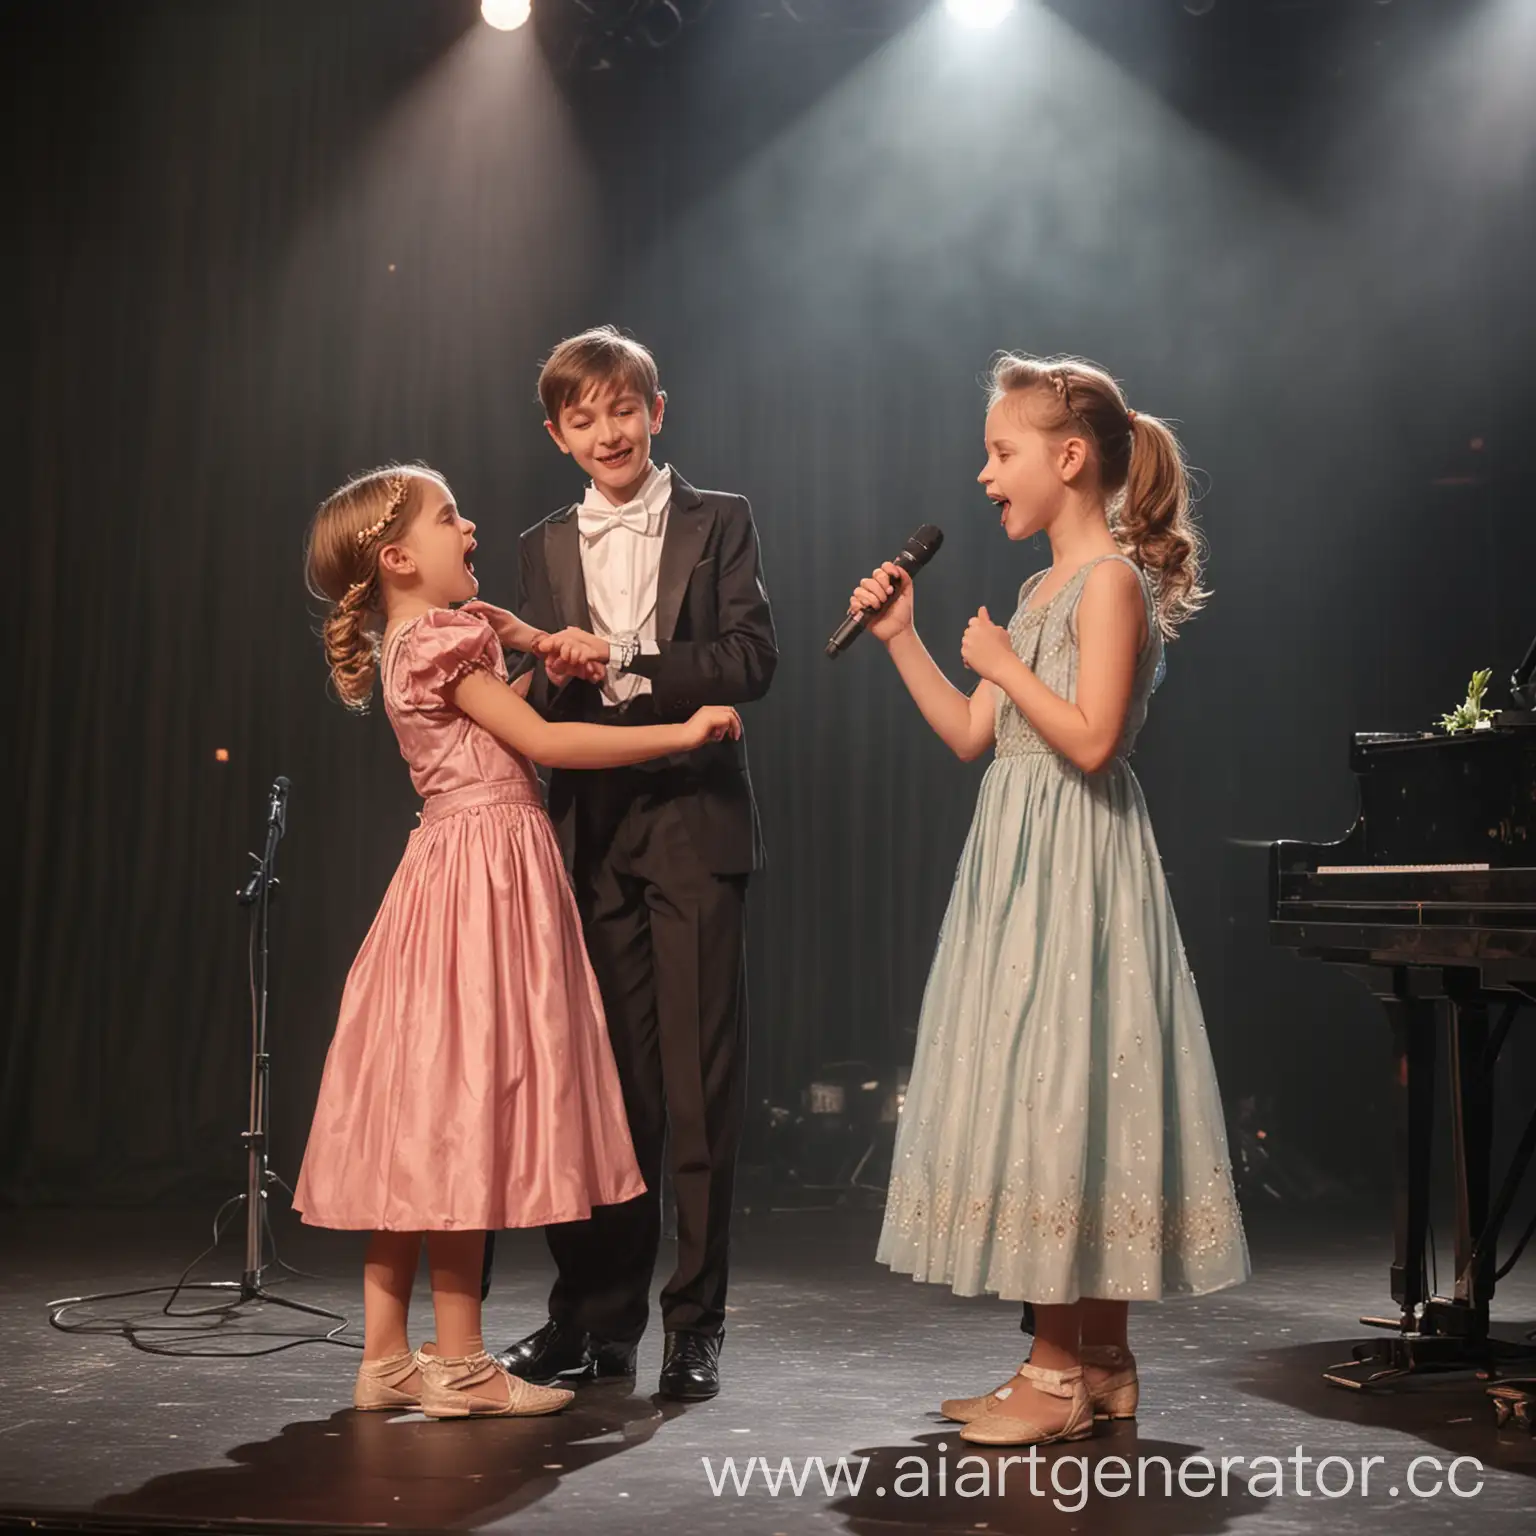 Children-Performing-on-Stage-Boy-Dancing-in-Costume-Girl-Singing-with-Microphone-Piano-Accompaniment